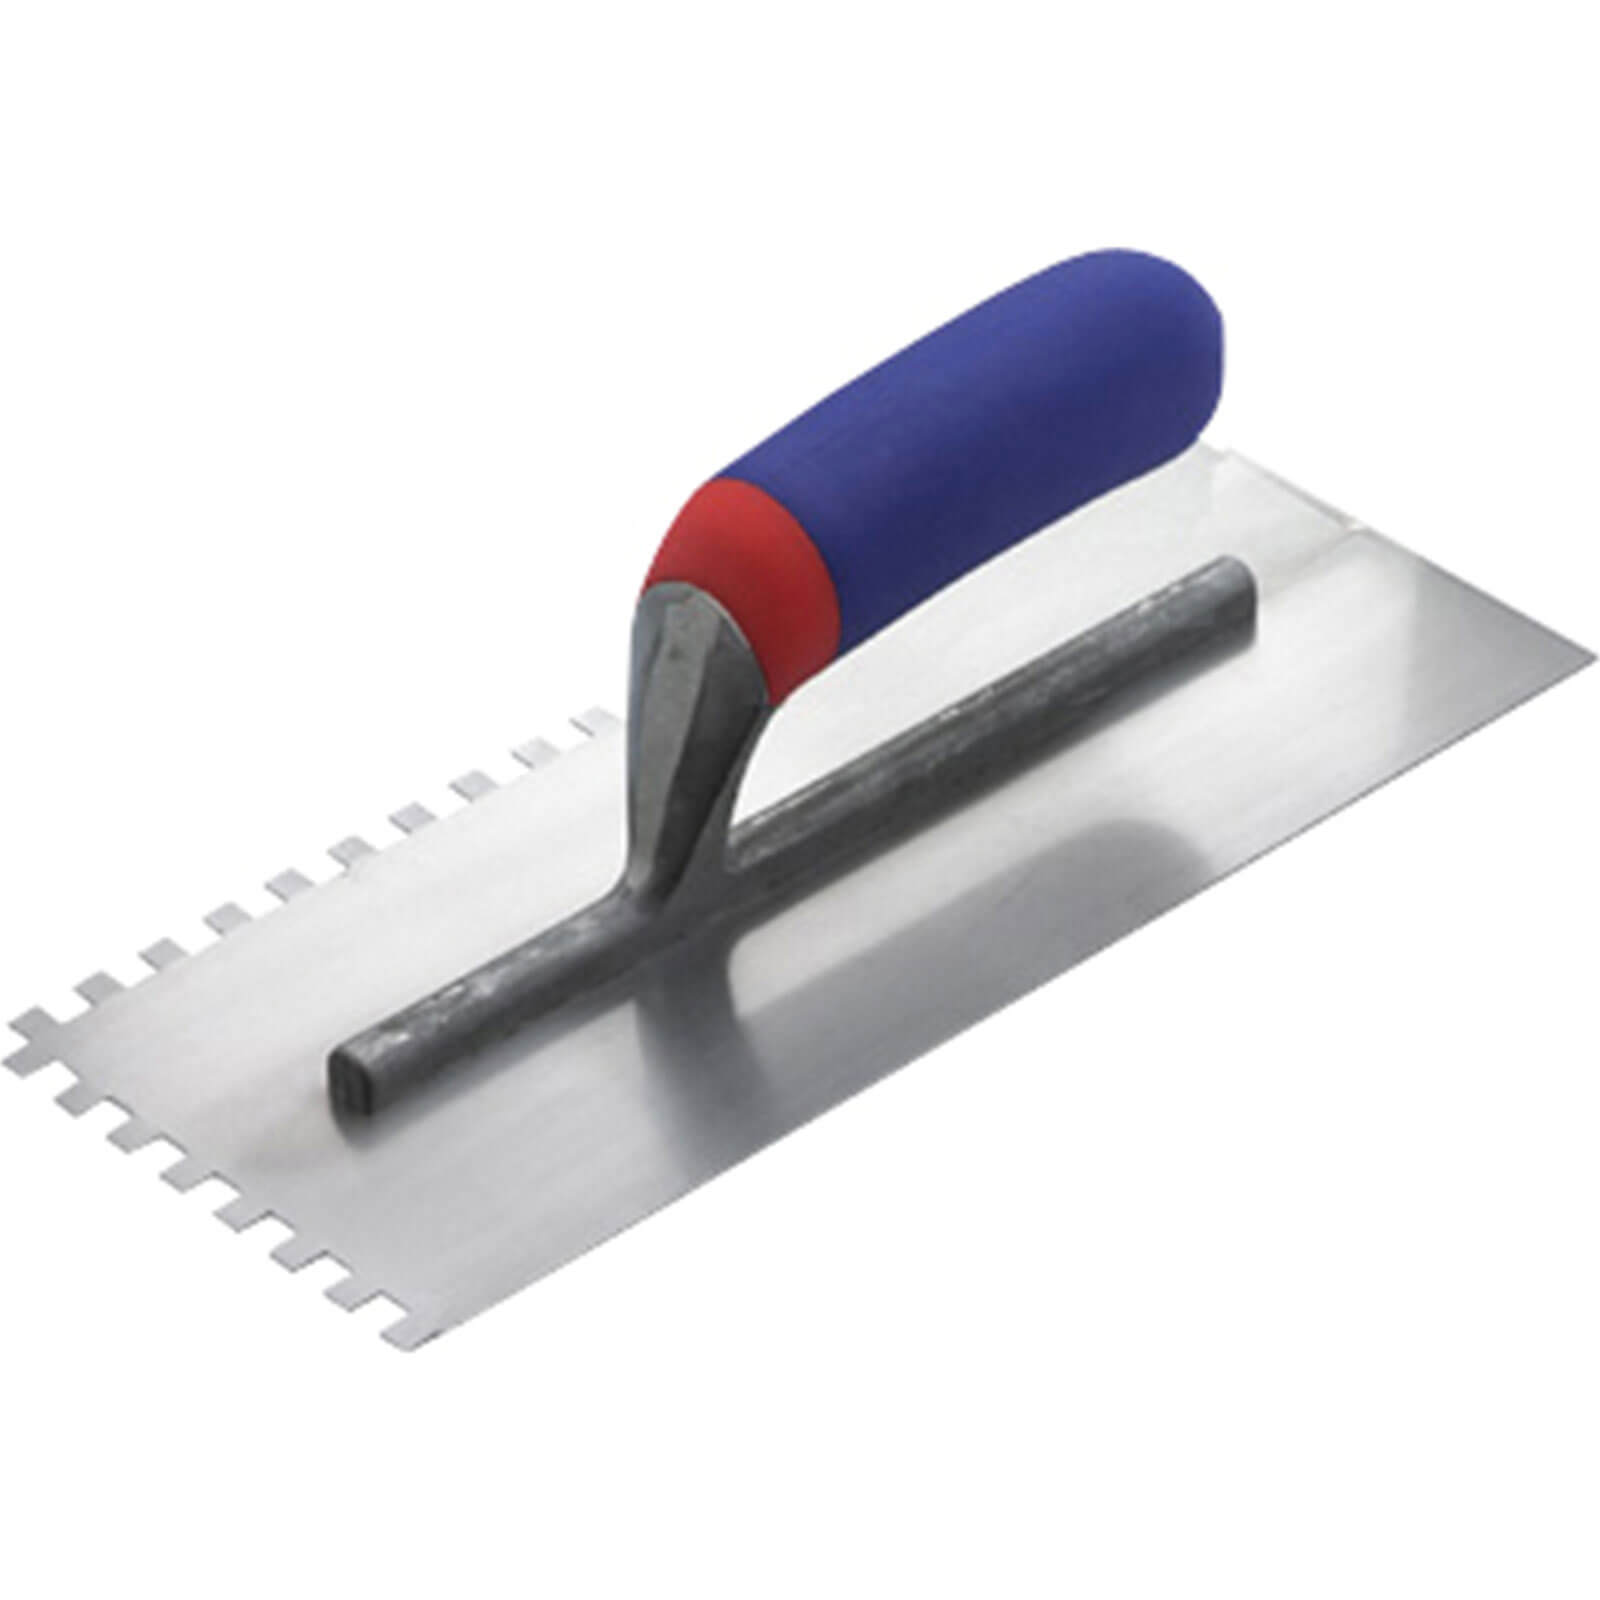 Image of RST Notched Trowel 11"